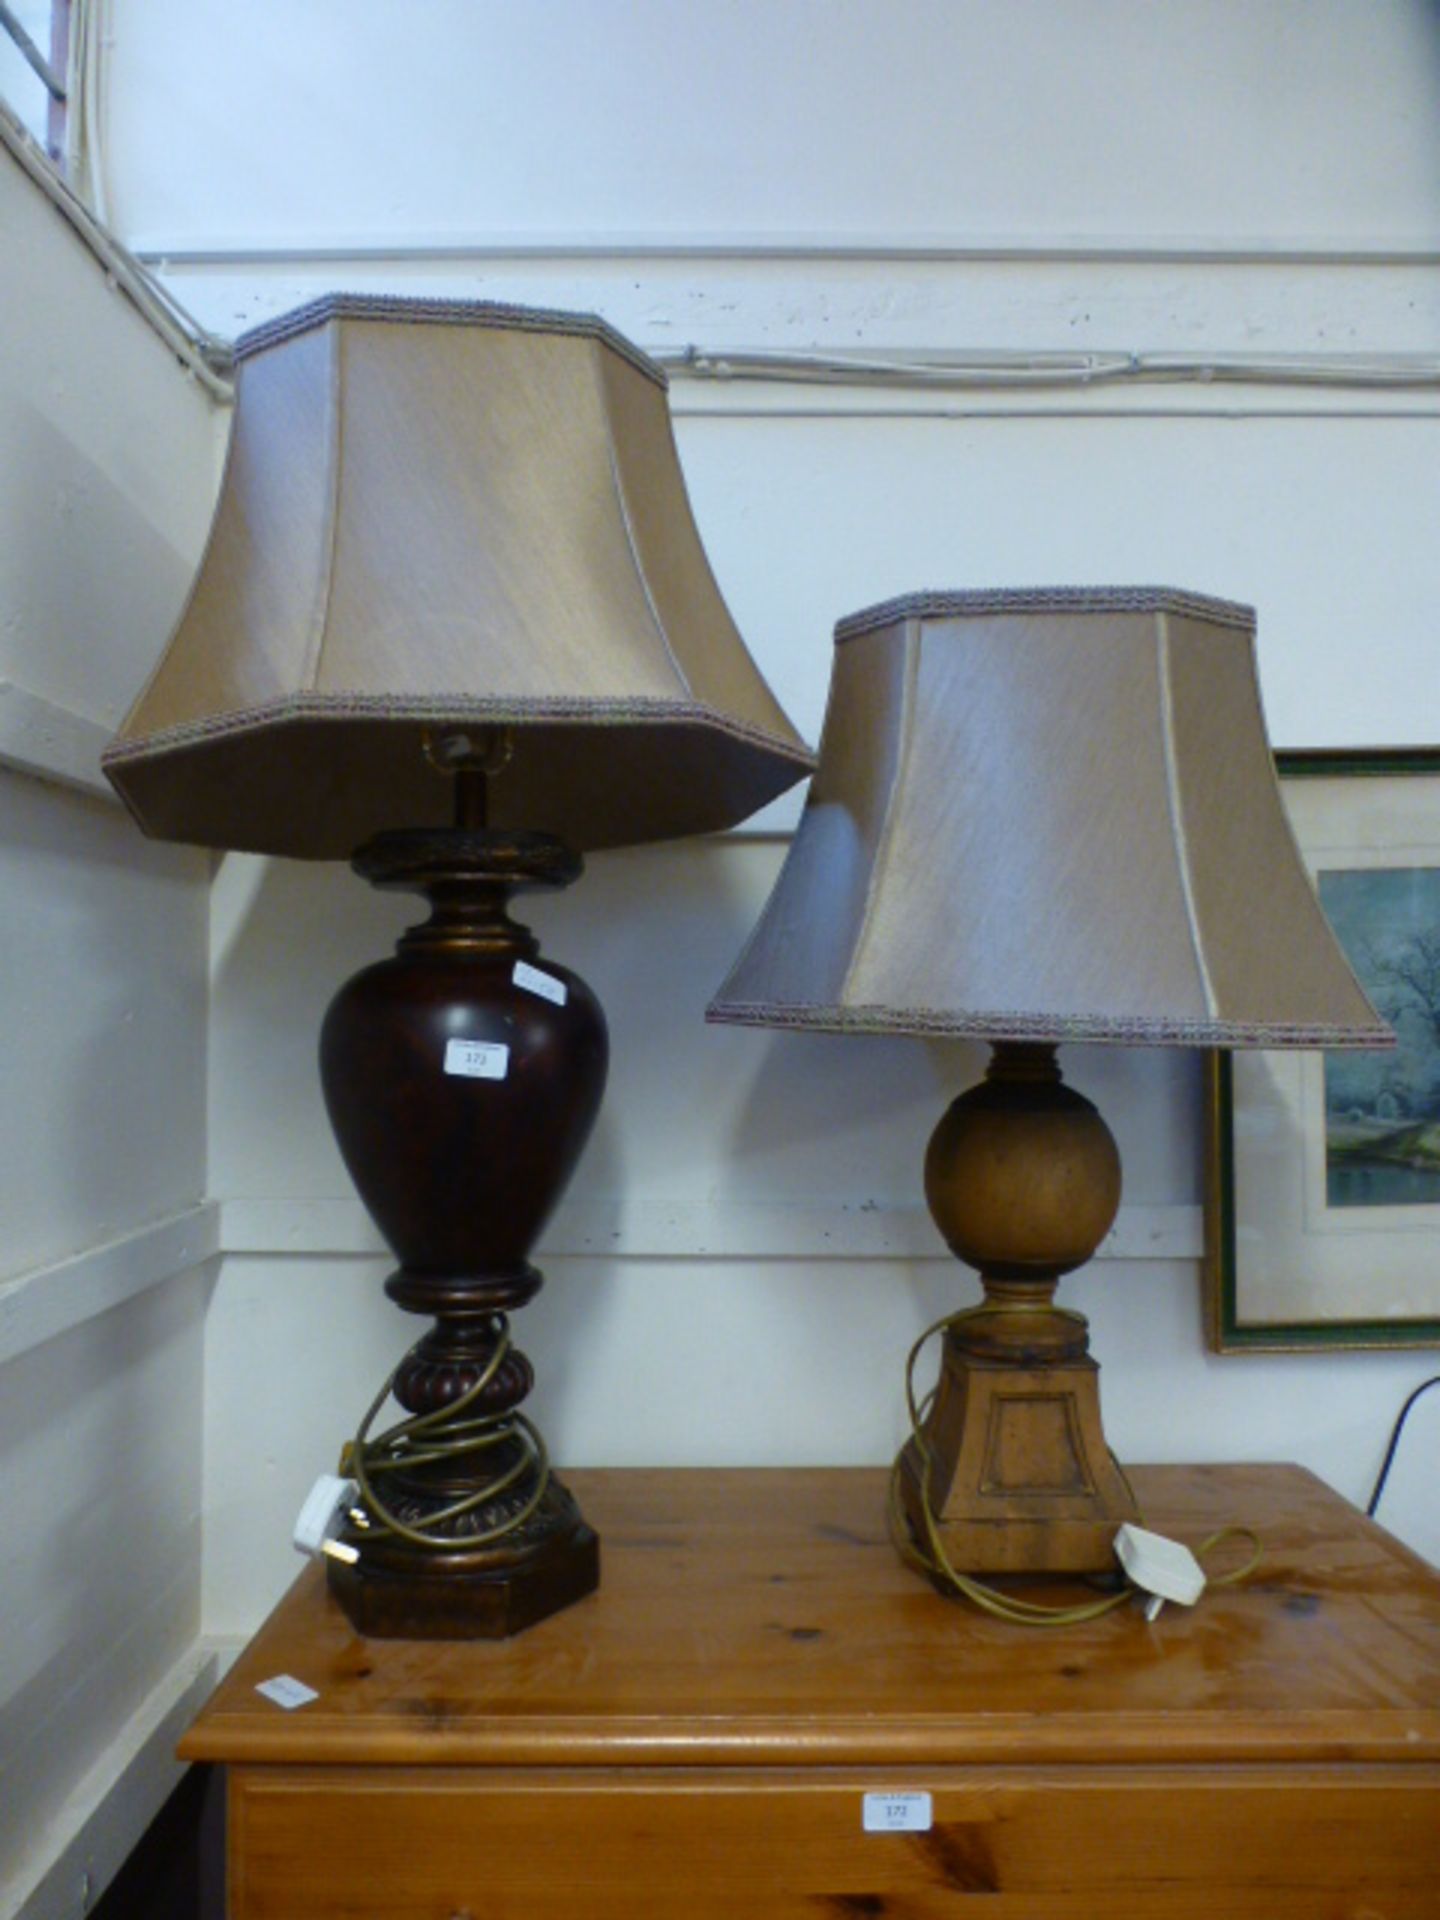 Two modern table lamps with shades